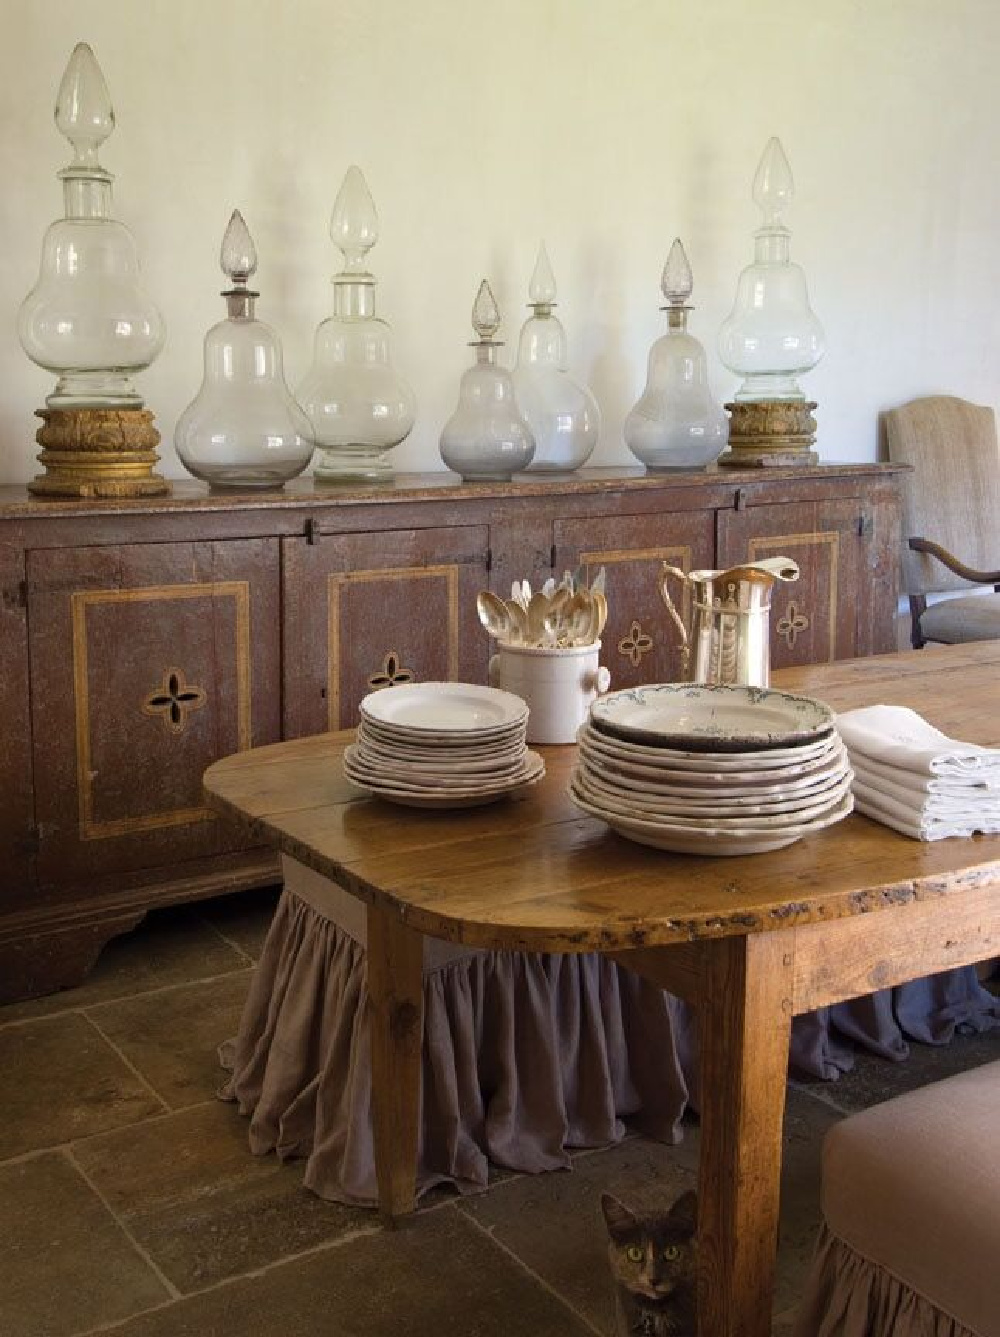 Old apothecary jars, rustic antiques from Europe, and a concerned kitty too in a dining room by Chateau Domingue. #diningrooms #interiordesign #countryfrench